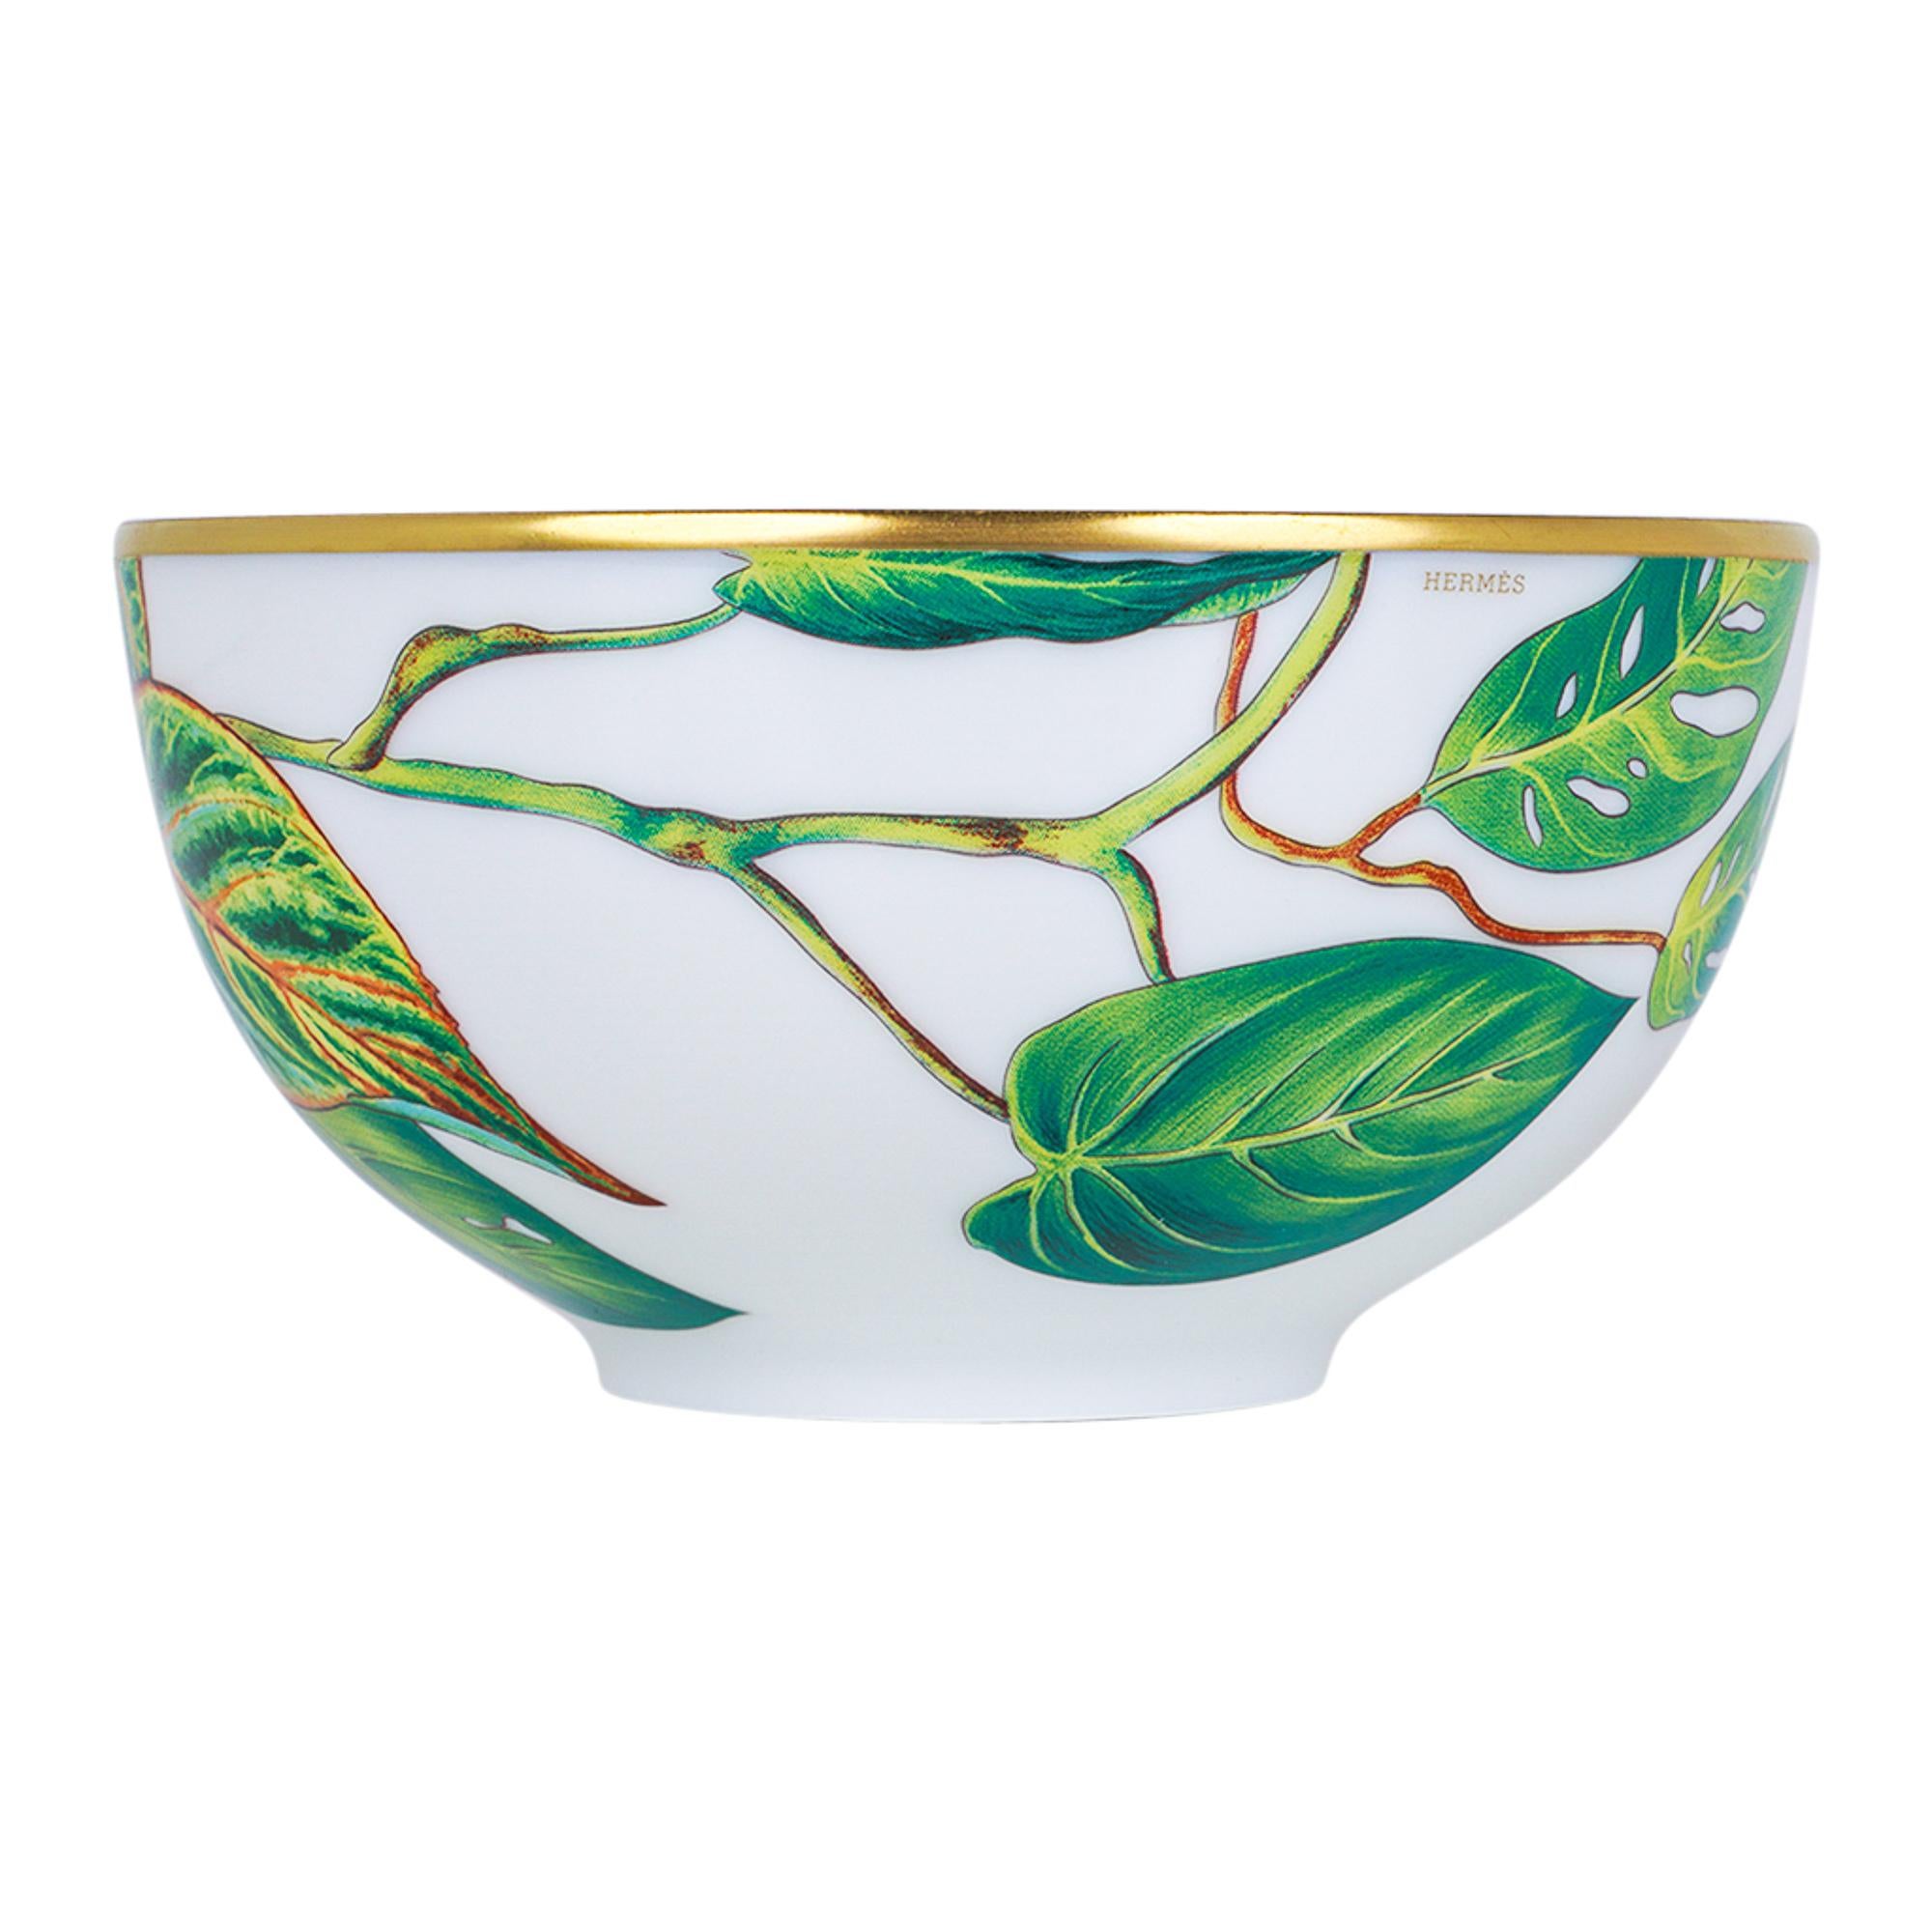 Mightychic offers an Hermes Medium Vegetable Bowl featured in the classic Hermes Passifolia pattern.
A beautiful hommage to the peace and power of flora.
Decorated using Chromolithography.
Hand-painted 24K gold trim.
Designed by Nathalie